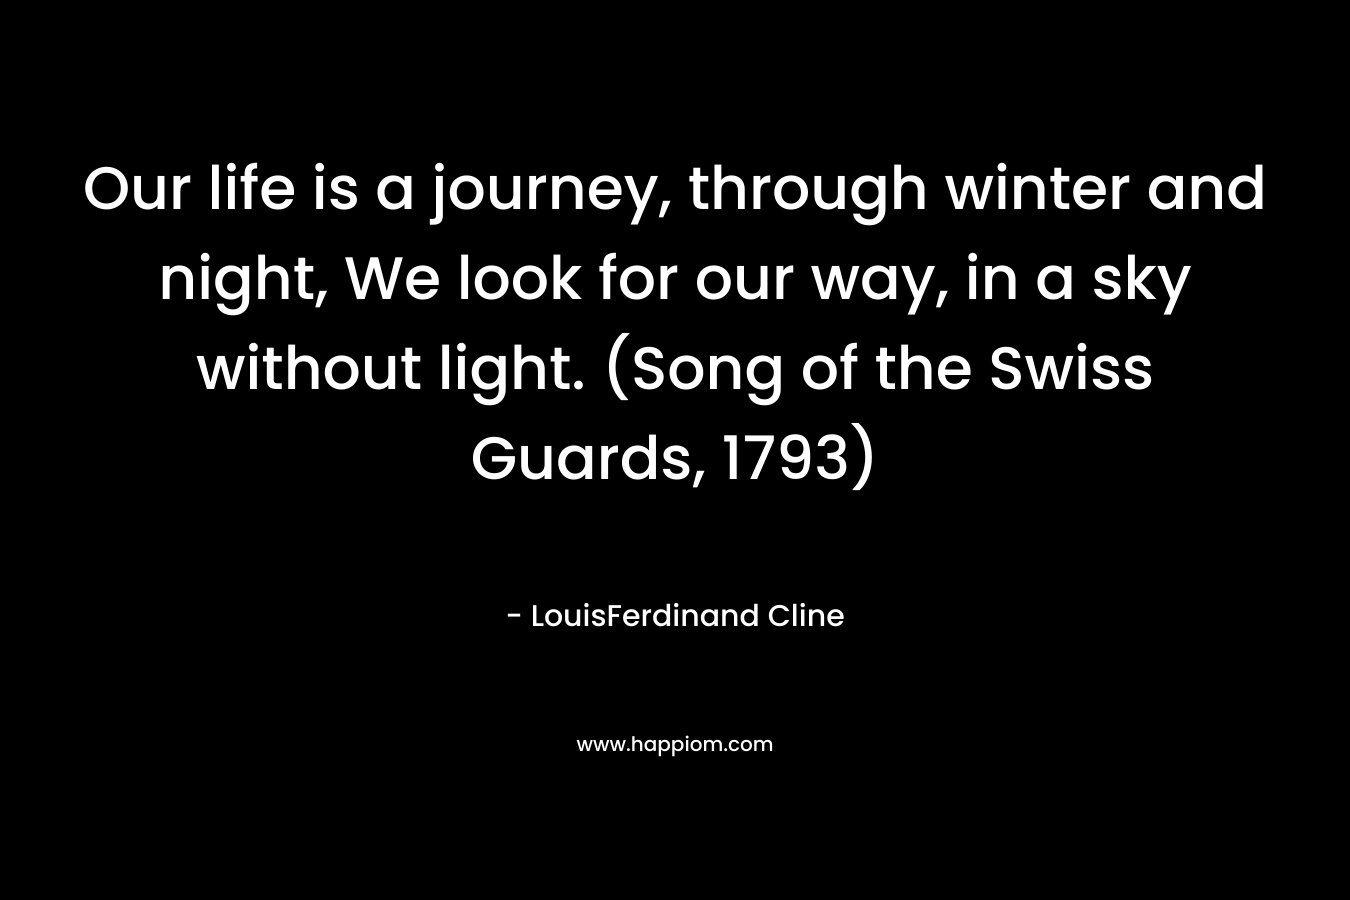 Our life is a journey, through winter and night, We look for our way, in a sky without light. (Song of the Swiss Guards, 1793) – LouisFerdinand Cline